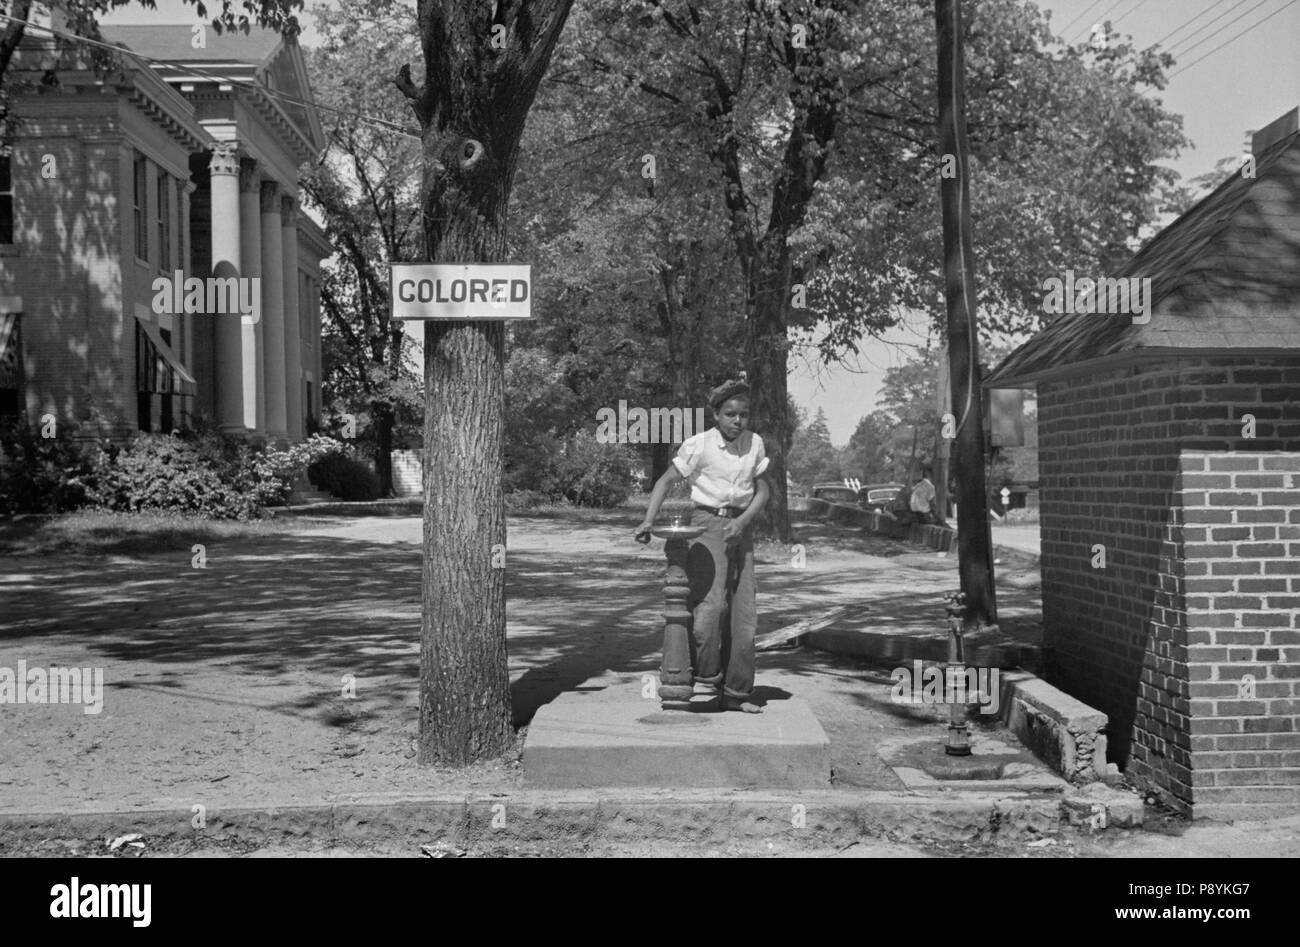 Boy at Drinking Fountain with Sign 'Colored' on County Courthouse Lawn, Halifax, North Carolina, USA, John Vachon, Farm Security Administration, April 1938 Stock Photo